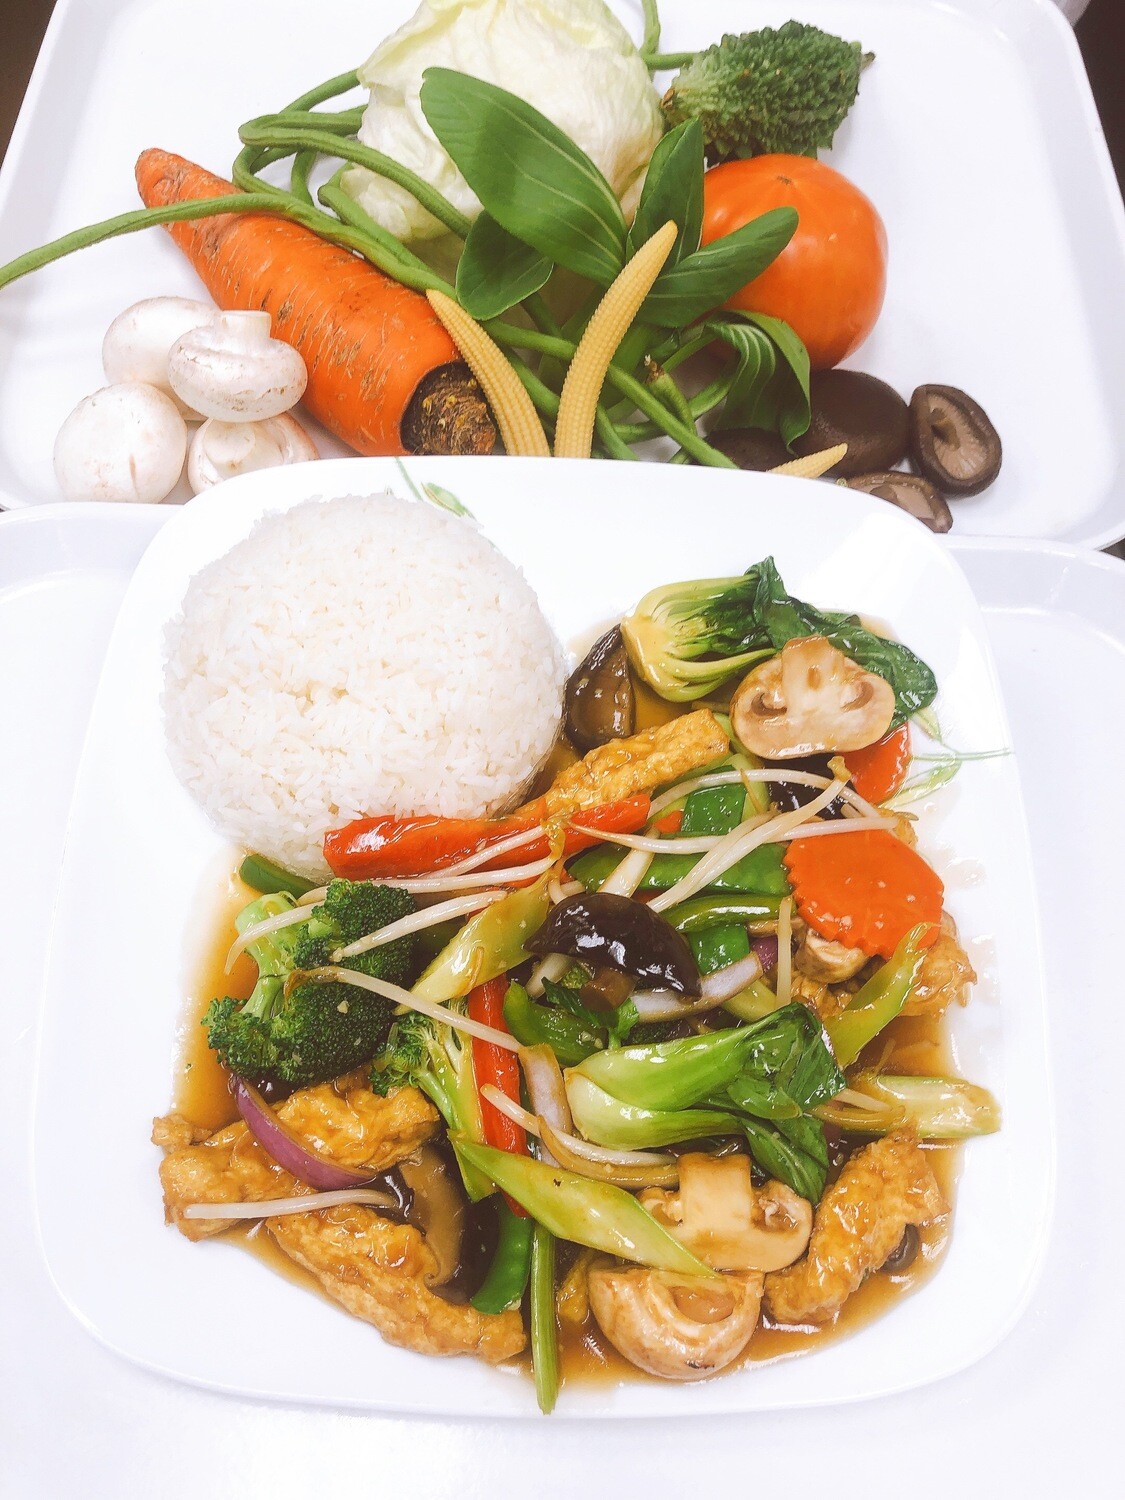 607- Stir Fried Vegetables, Mushrooms, and Tofu with Steamed Rice